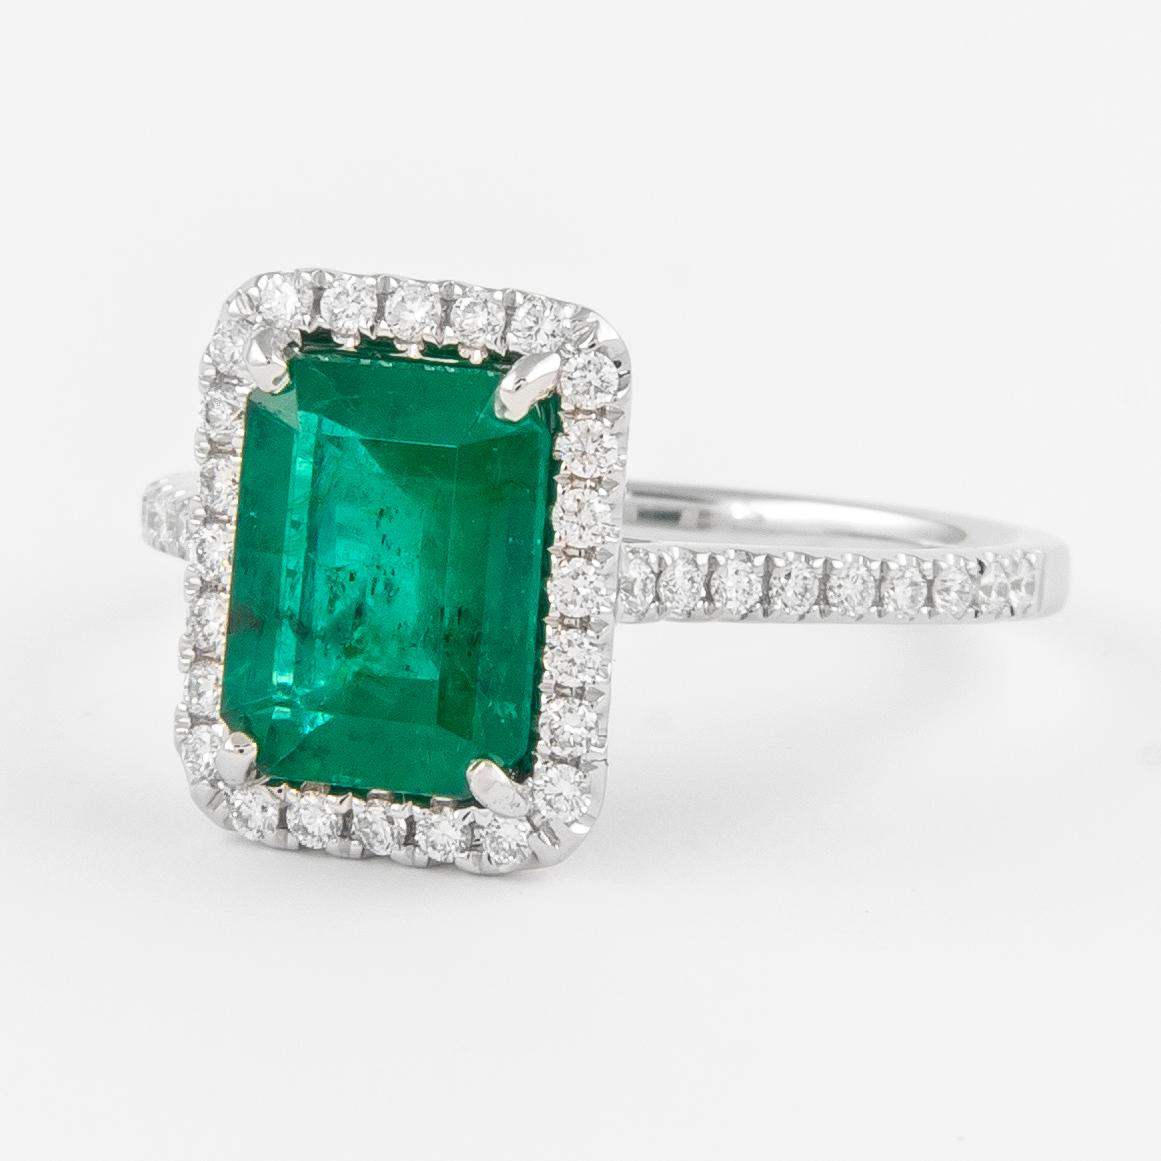 Emerald Cut GIA 1.81 carat Emerald and Diamond Halo Ring 18k White Gold For Sale